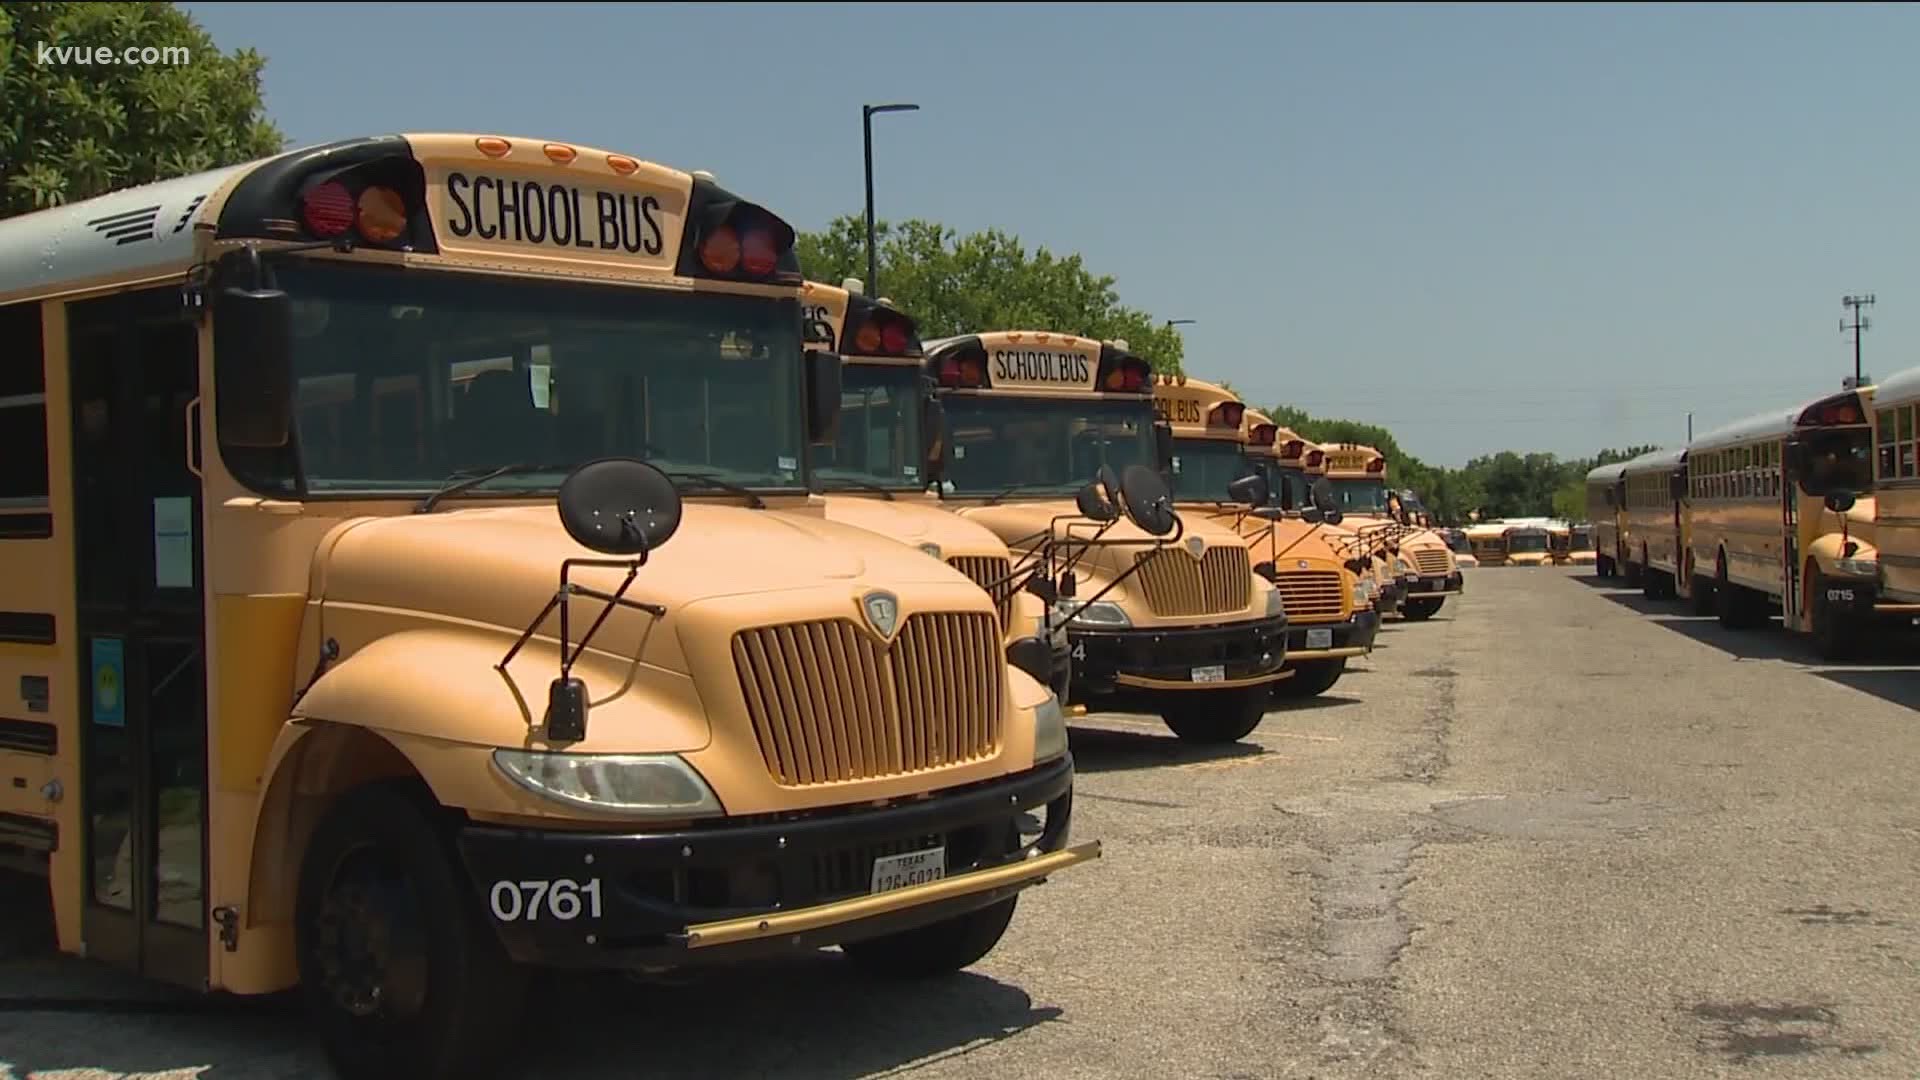 A group of Austin ISD employees is worried about not getting paid if there's a delayed start to the school year. Mari Salazar explains.